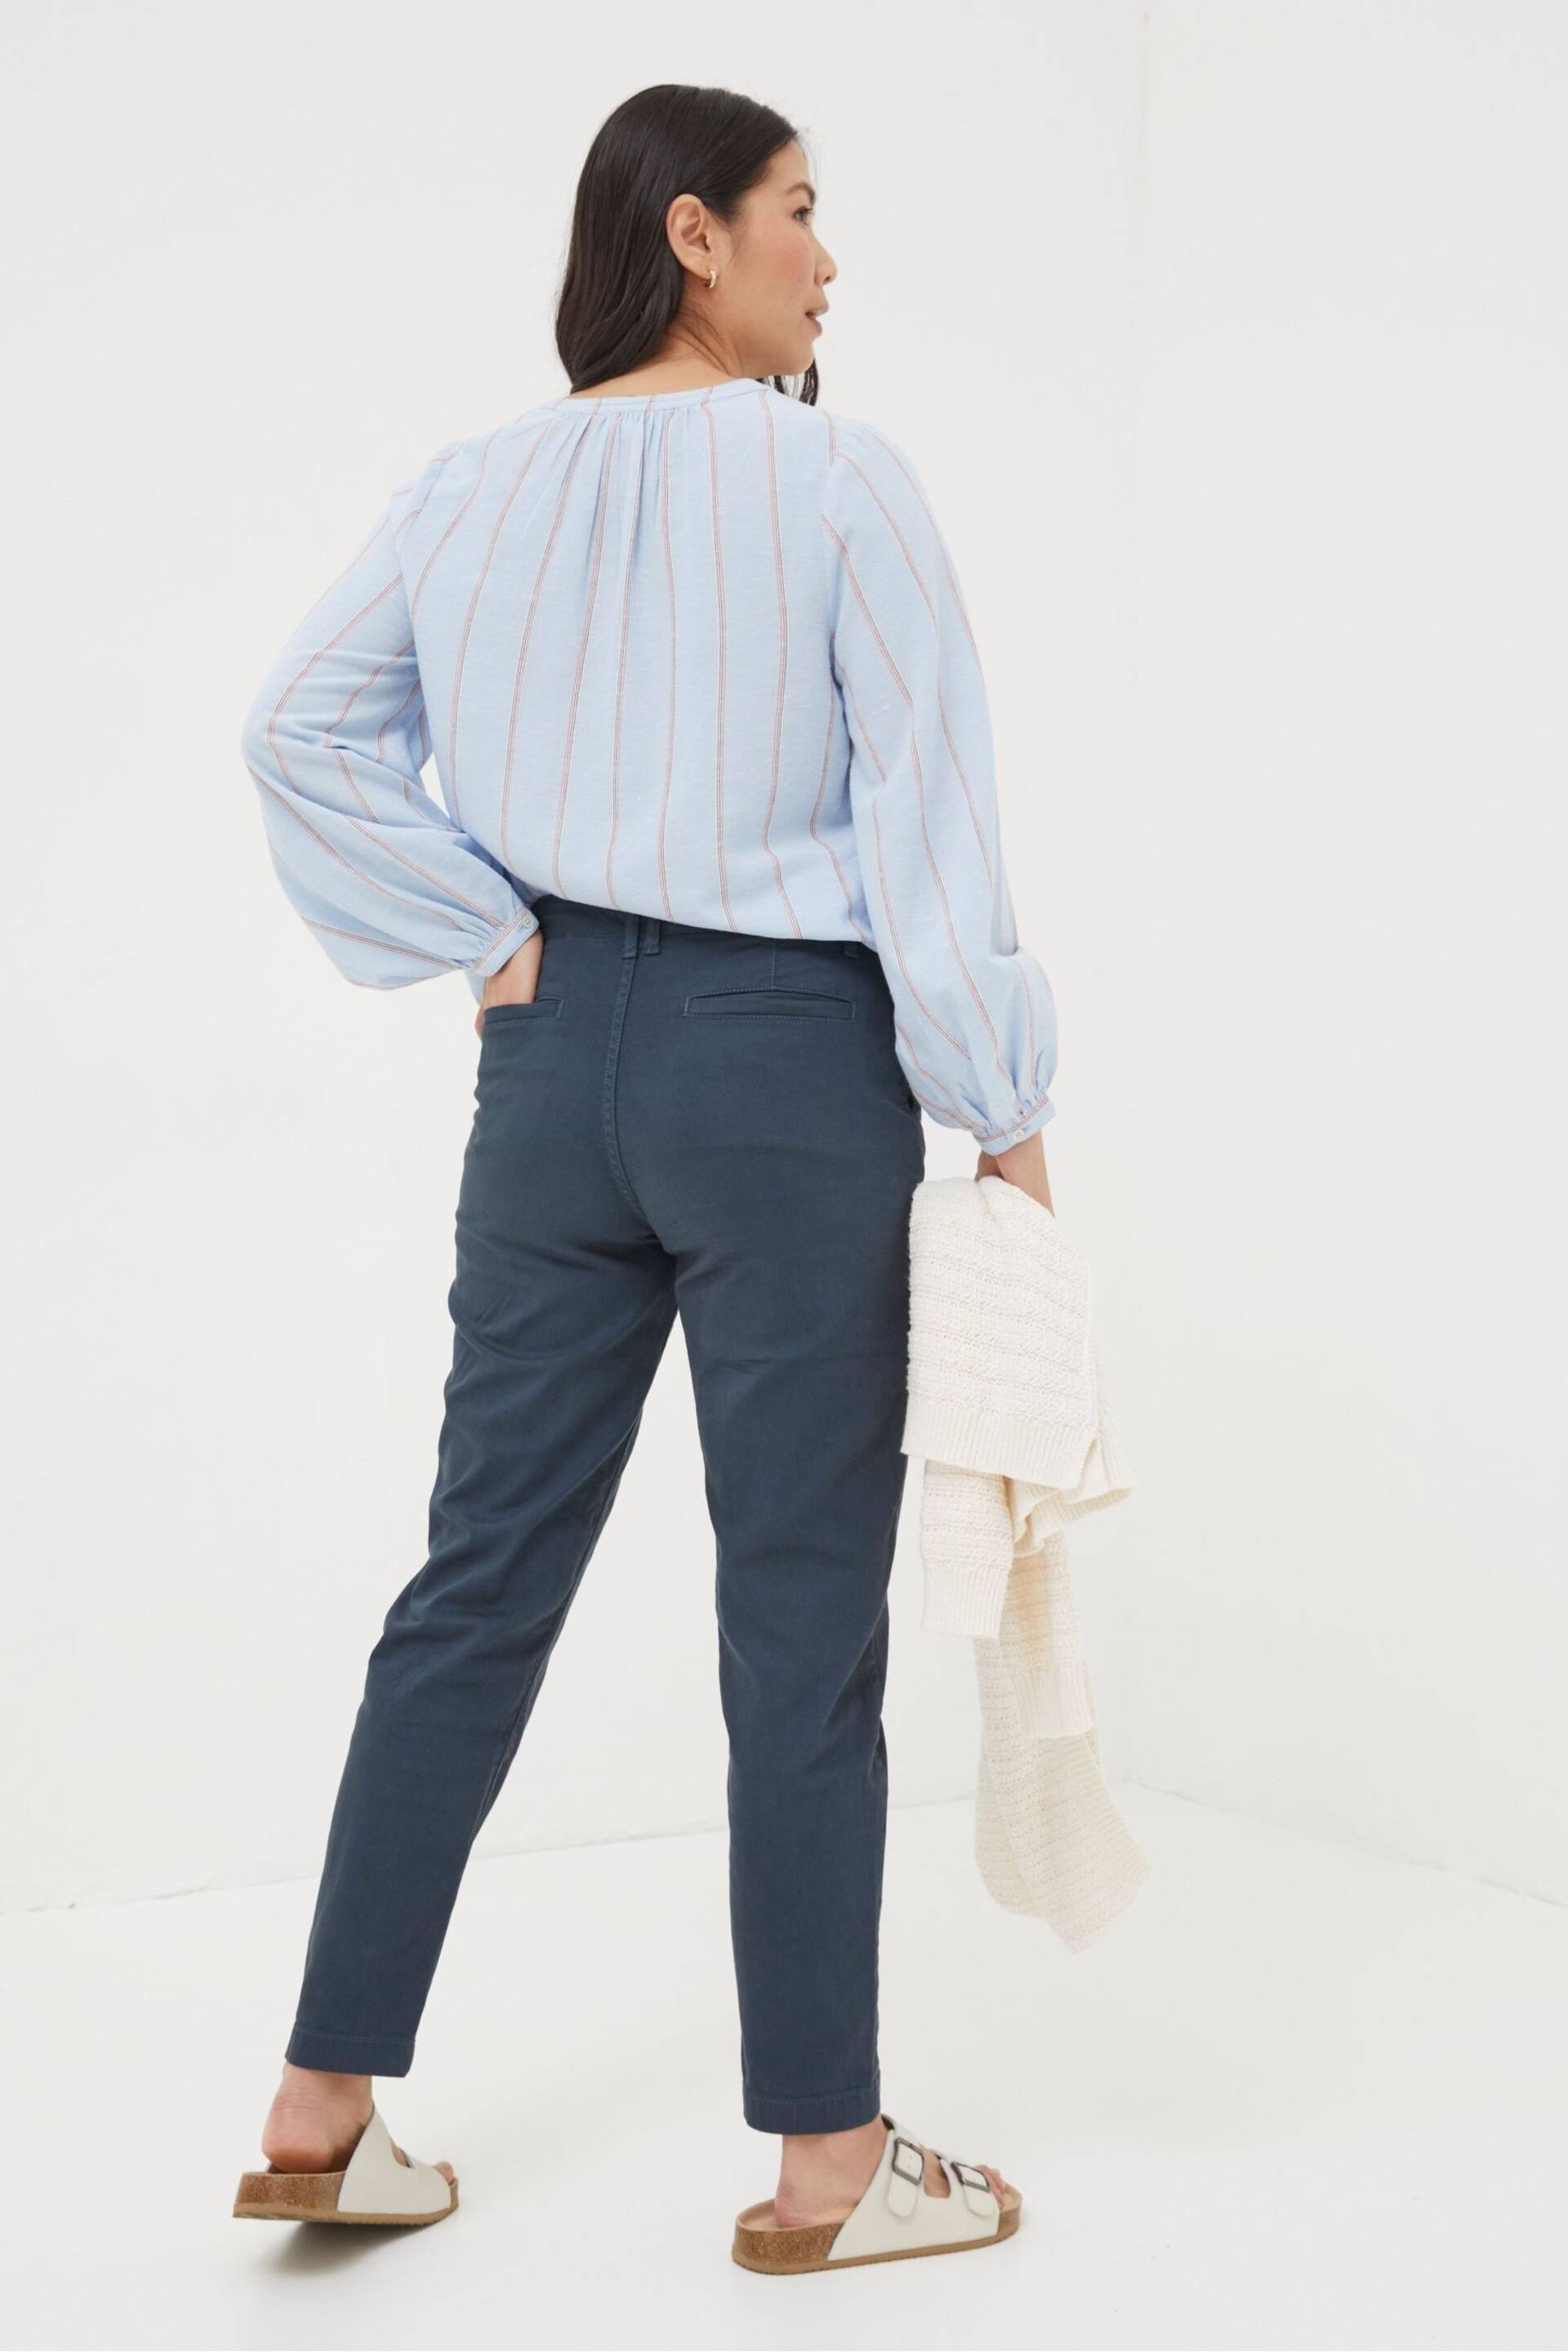 FatFace Blue Aspen Chino Trousers - Image 2 of 5